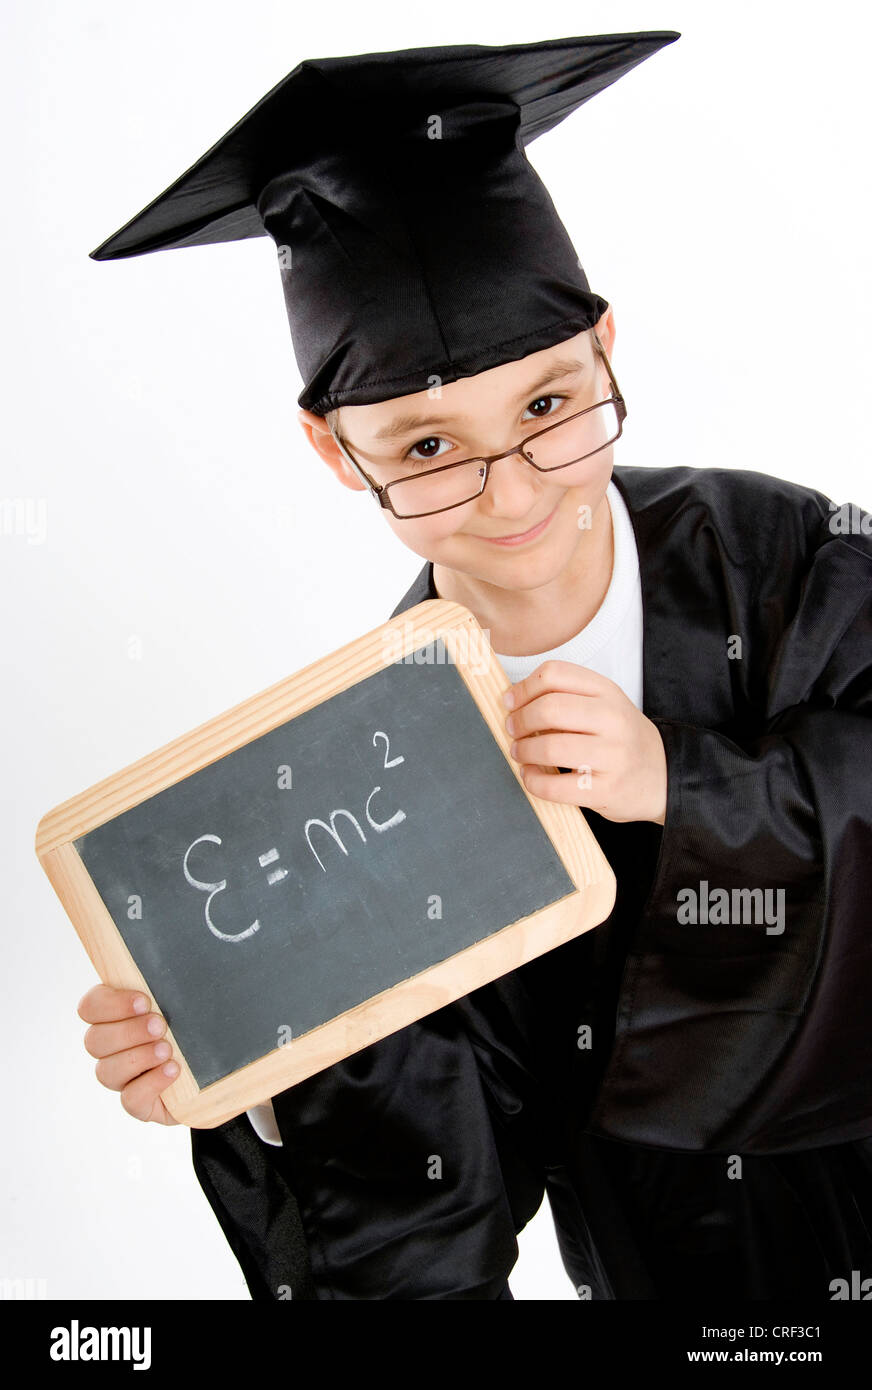 small boy as diploma holder with the theory of relativity on a blackboard Stock Photo